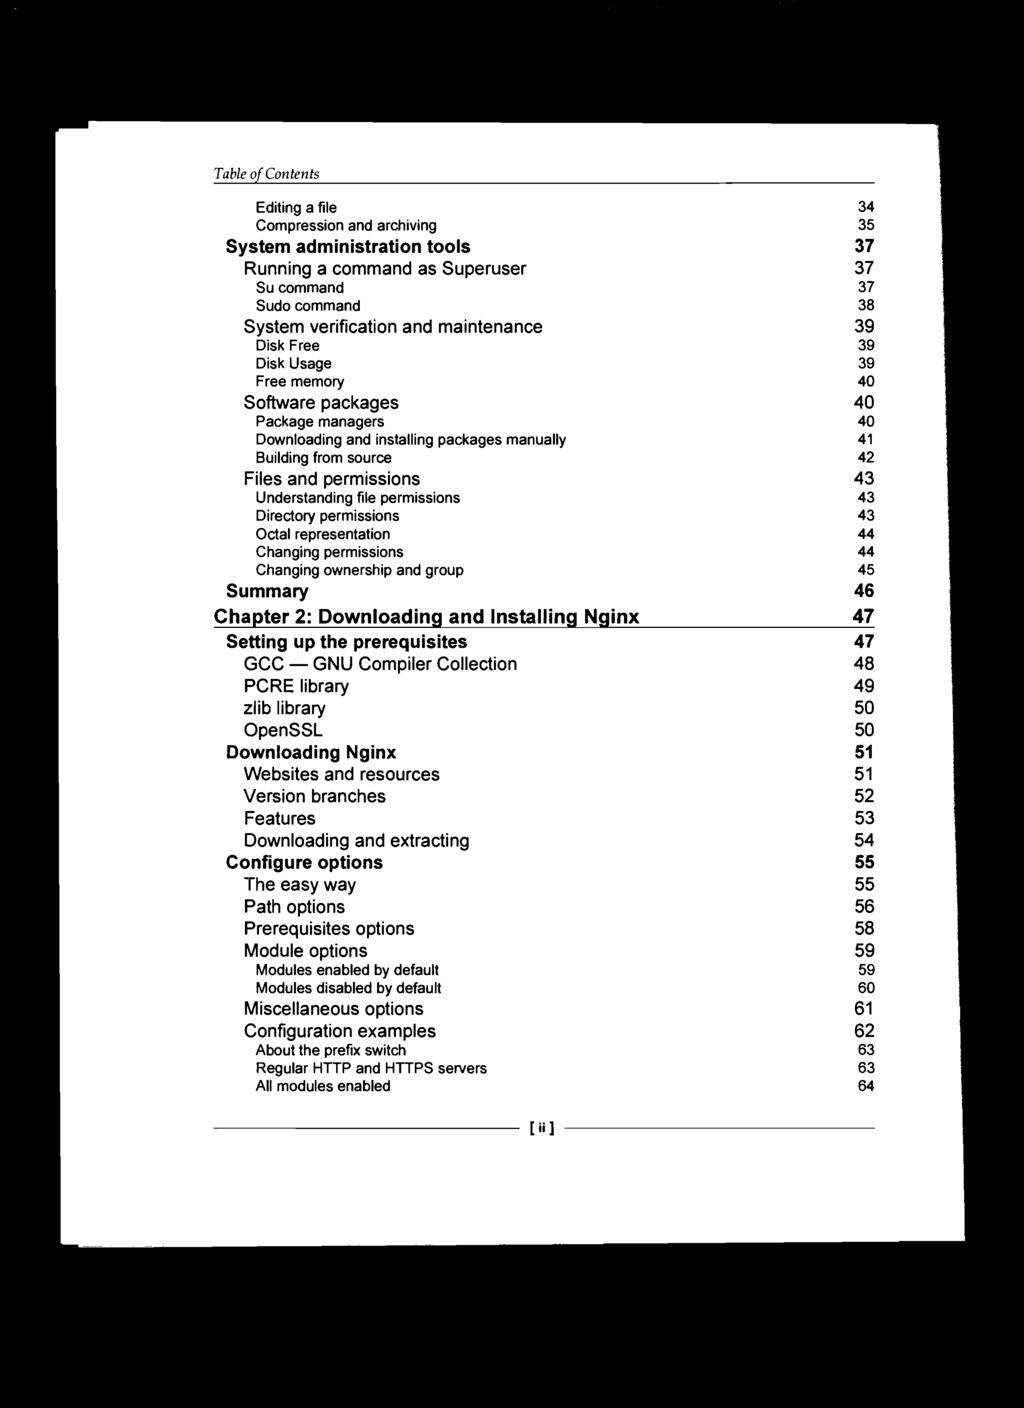 Table of Contents Editing a file Compression and archiving System administration tools Running a command as Superuser Su command Sudo command System verification and maintenance Disk Free Disk Usage